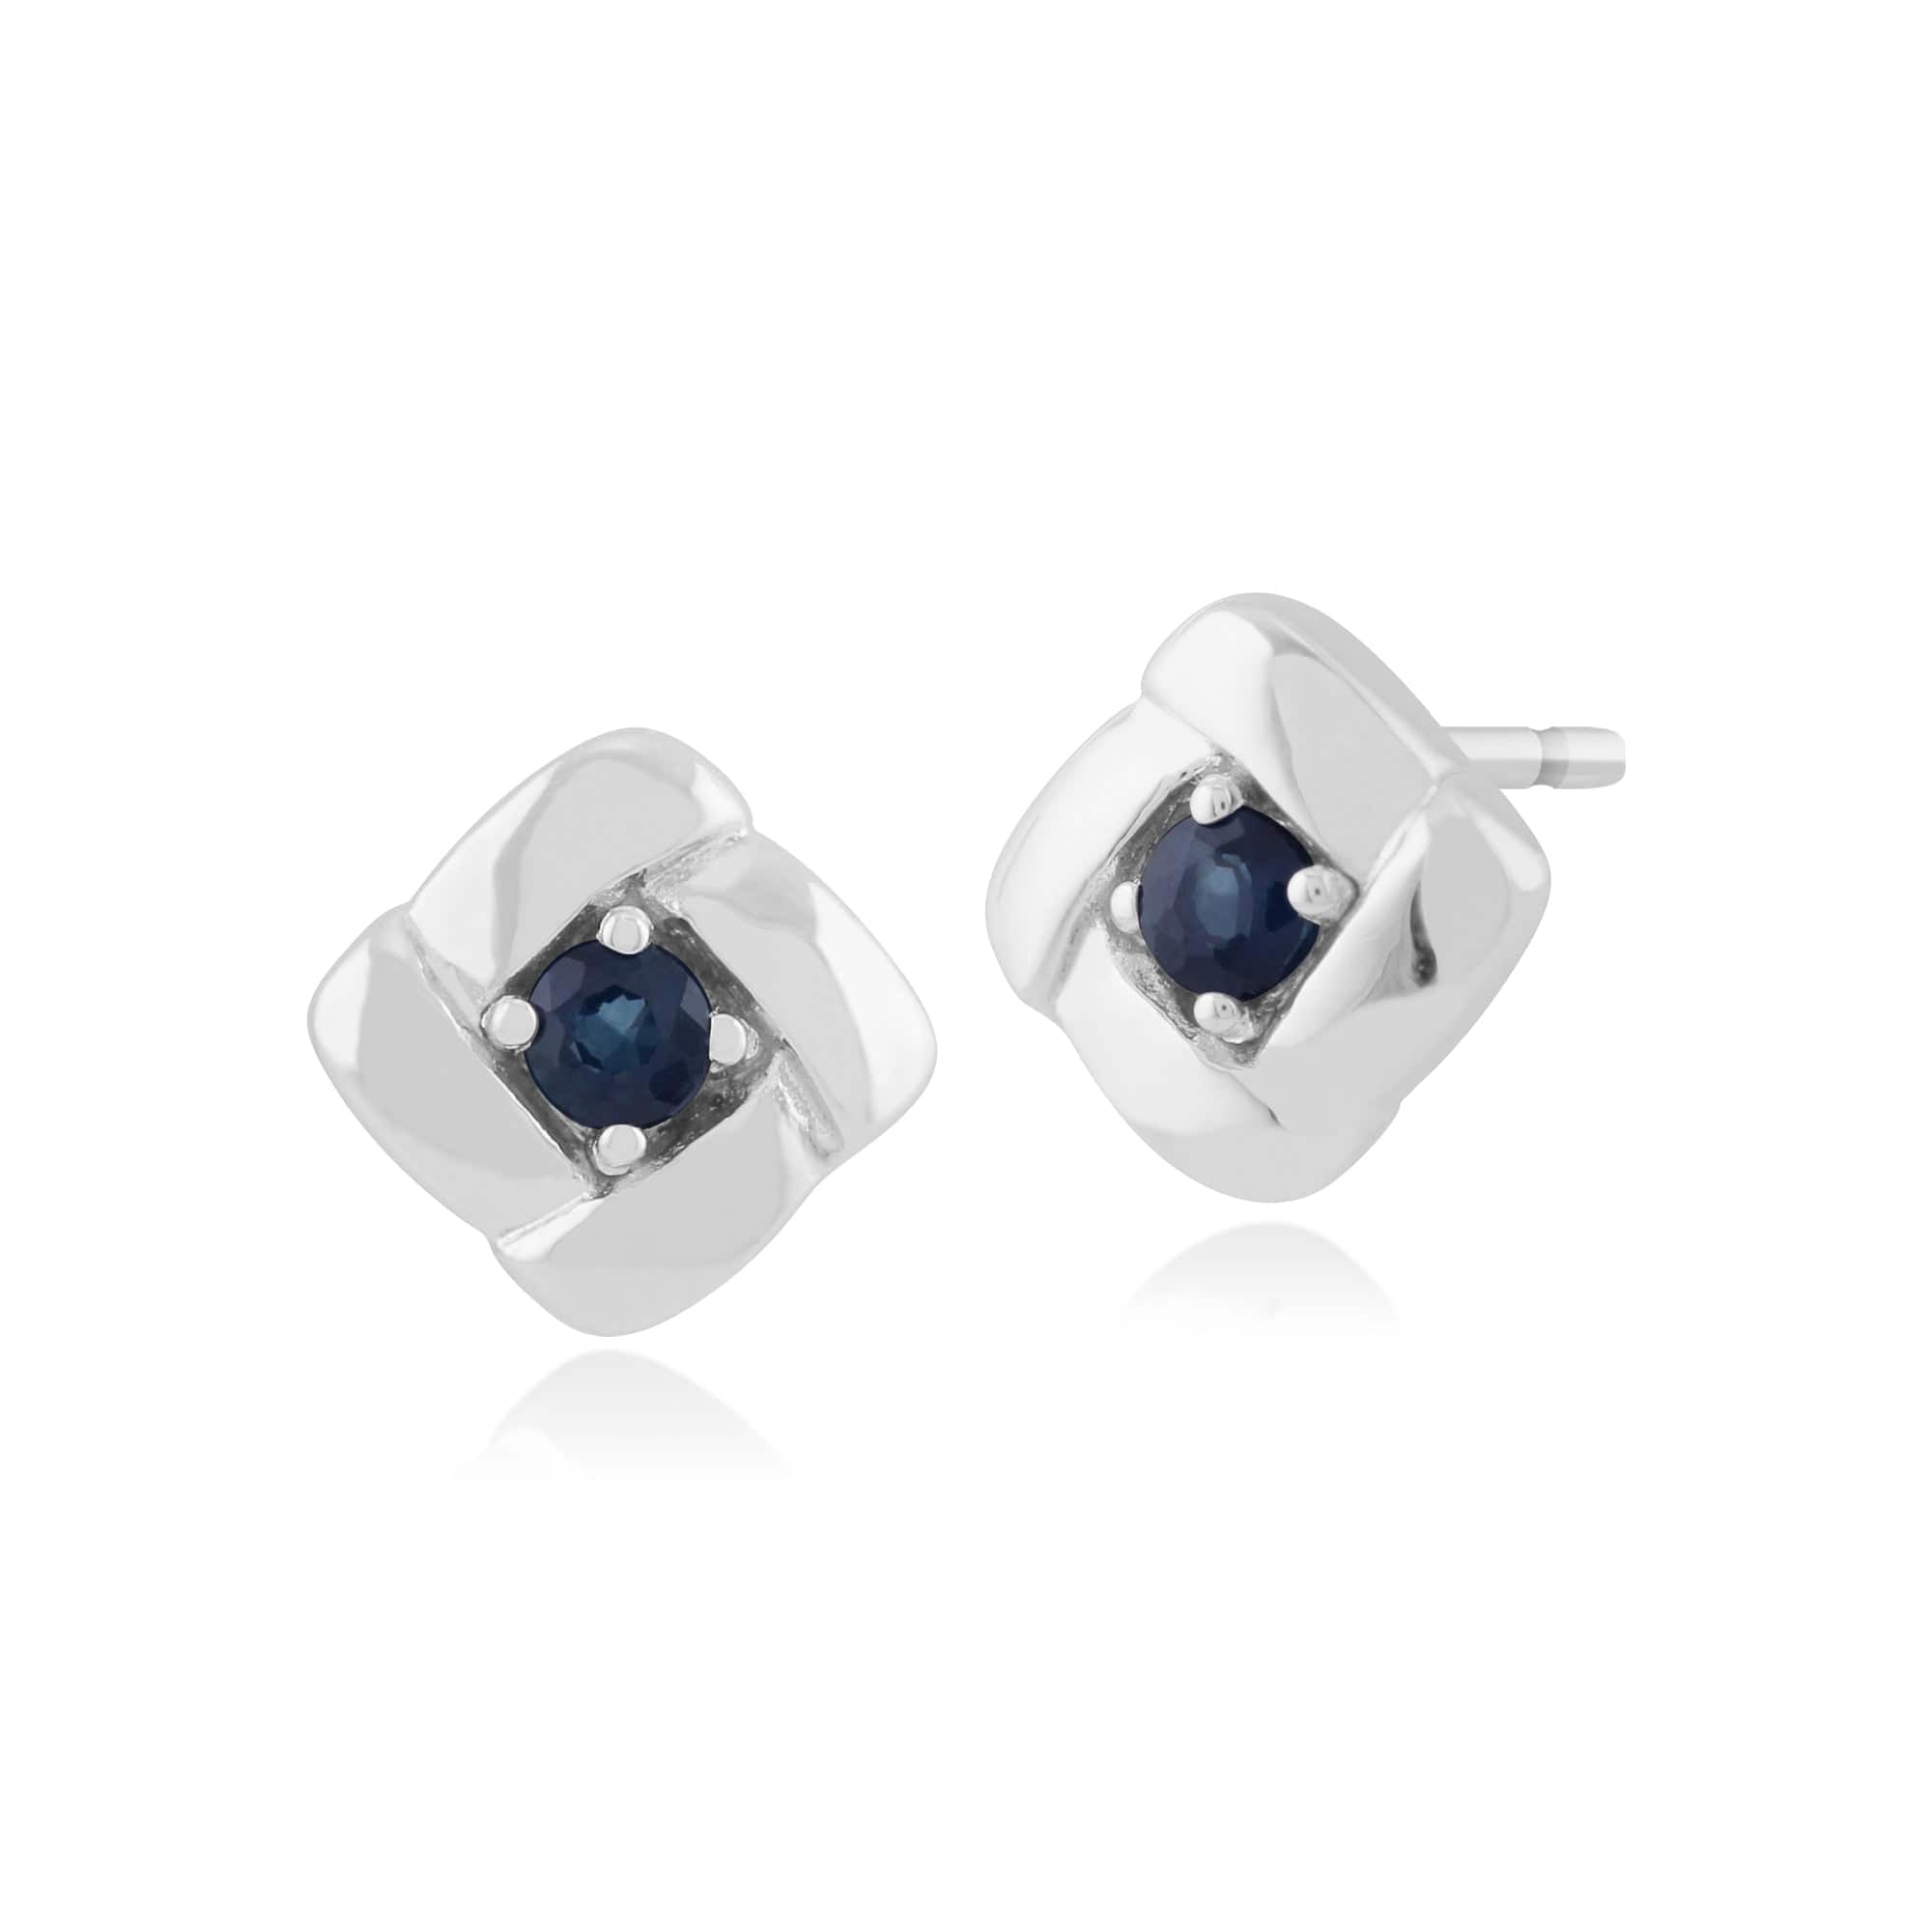 Classic Round Sapphire Square Crossover Stud Earrings in 925 Sterling Silver